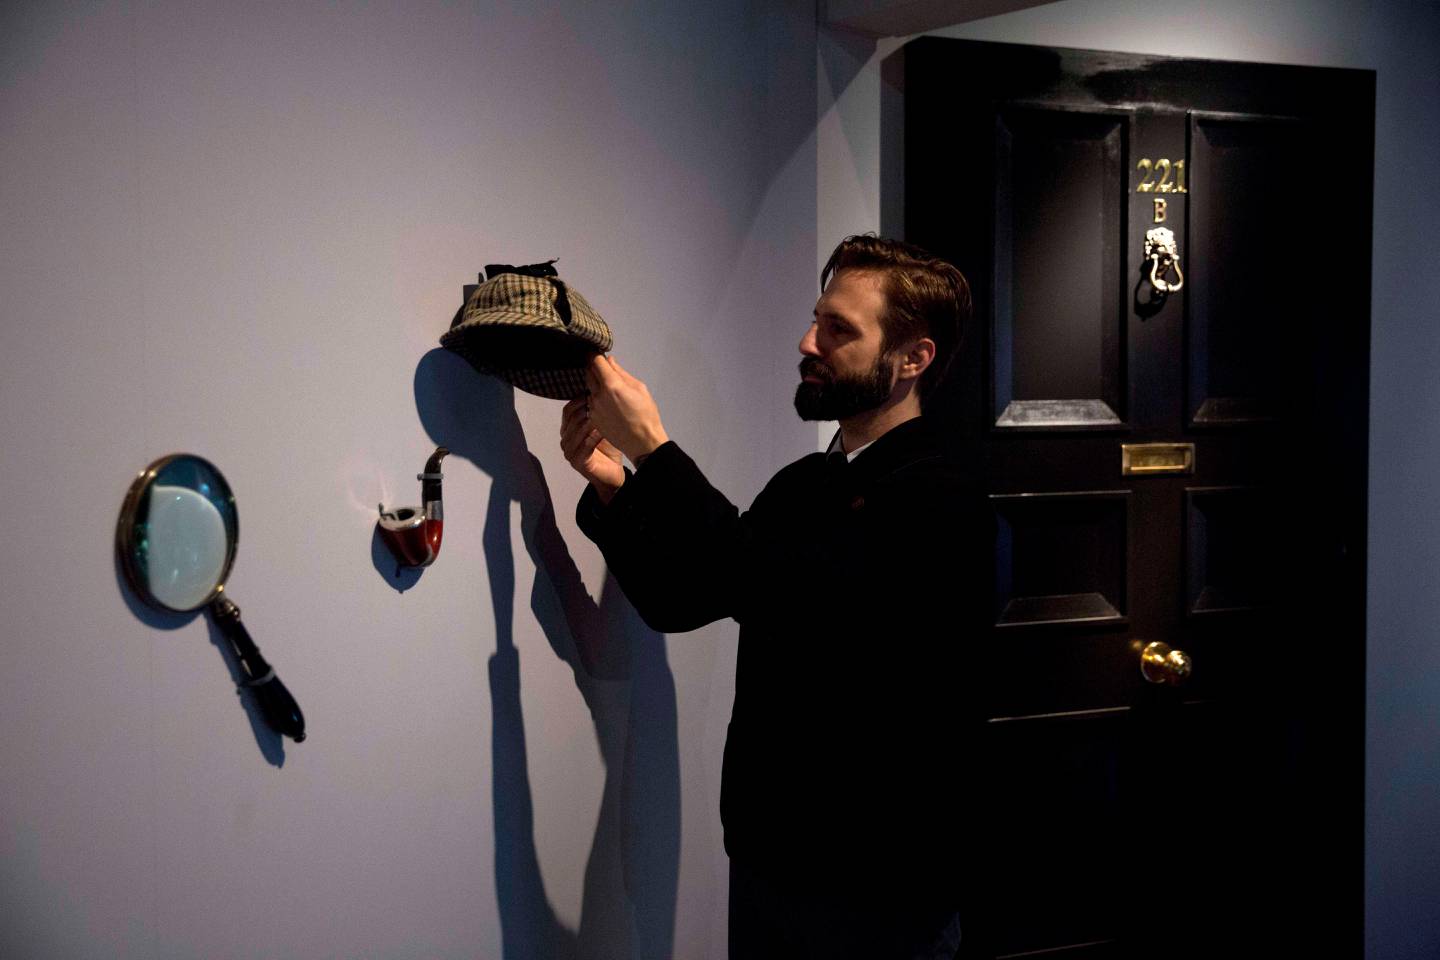 Curator Timothy Long poses for photographers with a Sherlock Holmes style pipe, deerstalker hat, and magnifying glass displayed beside an interpretation model of the fictional front door of his address 221B Baker Street which form part of the exhibition "Sherlock Holmes: The Man Who Never Lived and Will Never Die" at the Museum of London in London, Thursday, Oct. 16, 2014. The exhibition, which opens to the public on Friday, is the largest on the fictional detective created by Scottish author Sir Arthur Conan Doyle to be held in the UK for 60 years.  (AP Photo/Matt Dunham) / TT / kod 436